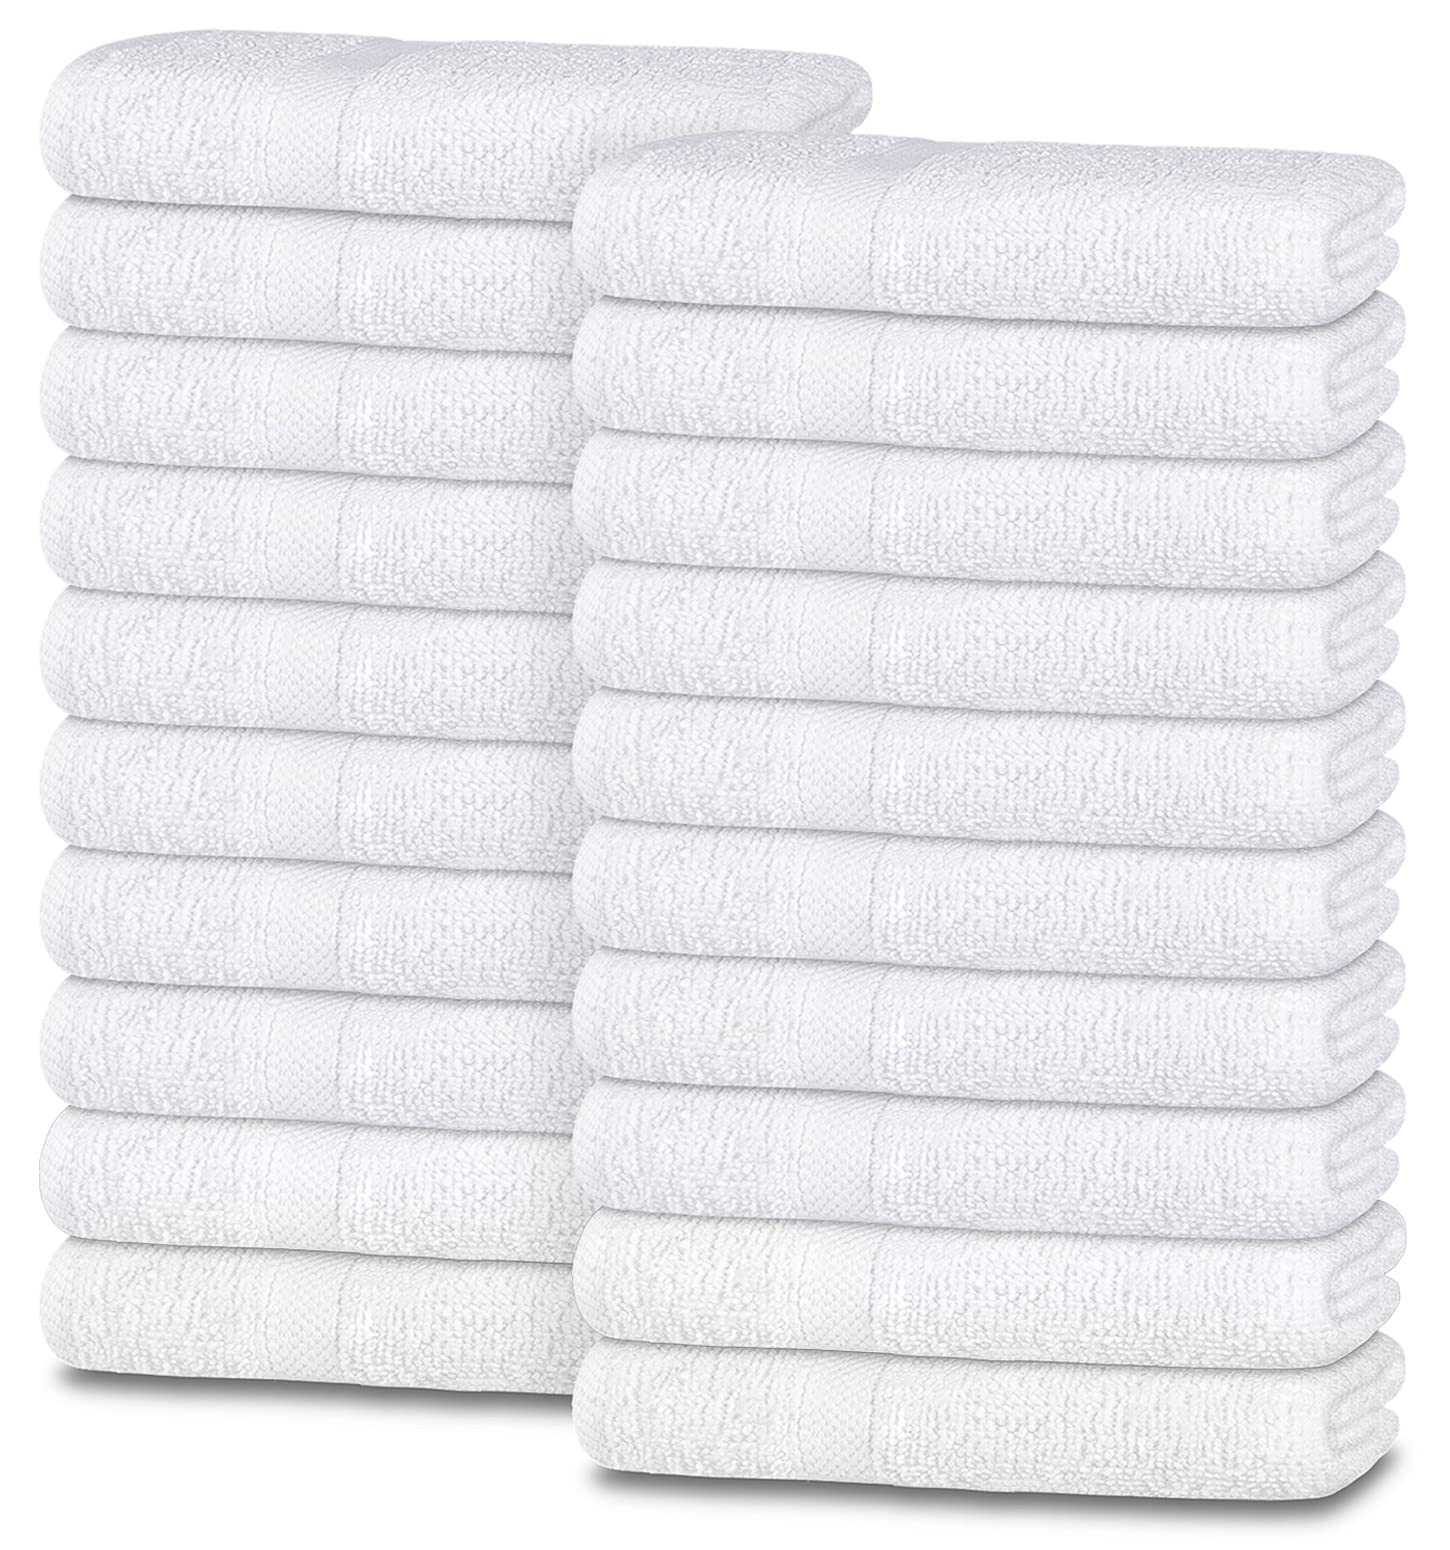 Wealuxe White Washcloths for Body and Face Towel, Cotton Wash Cloths Bulk  48 Pack, Flannel Spa Fingertip Wash Clothes 12x12 Inch, Soft Absorbent Gym